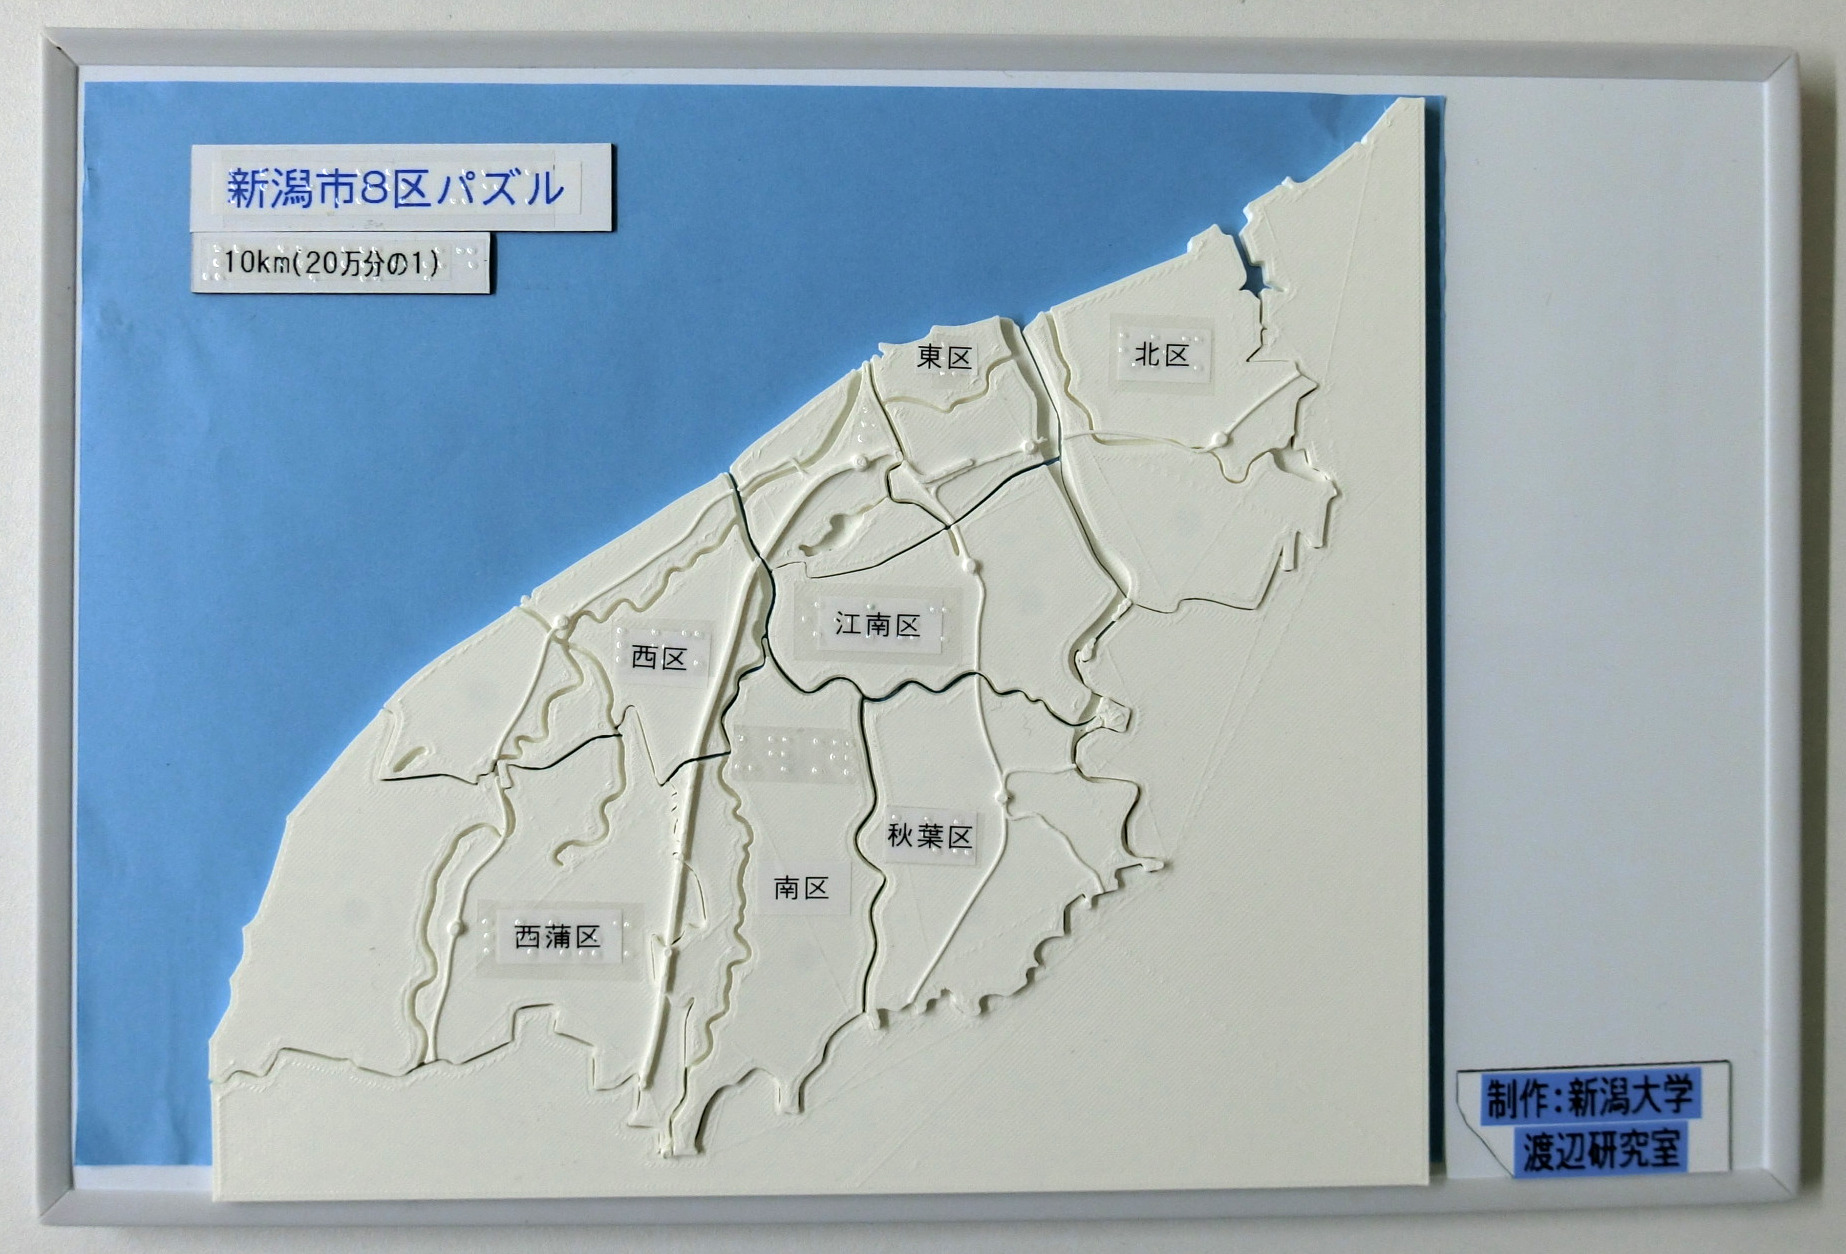 Niigata eight wards map puzzle made using a 3D printer